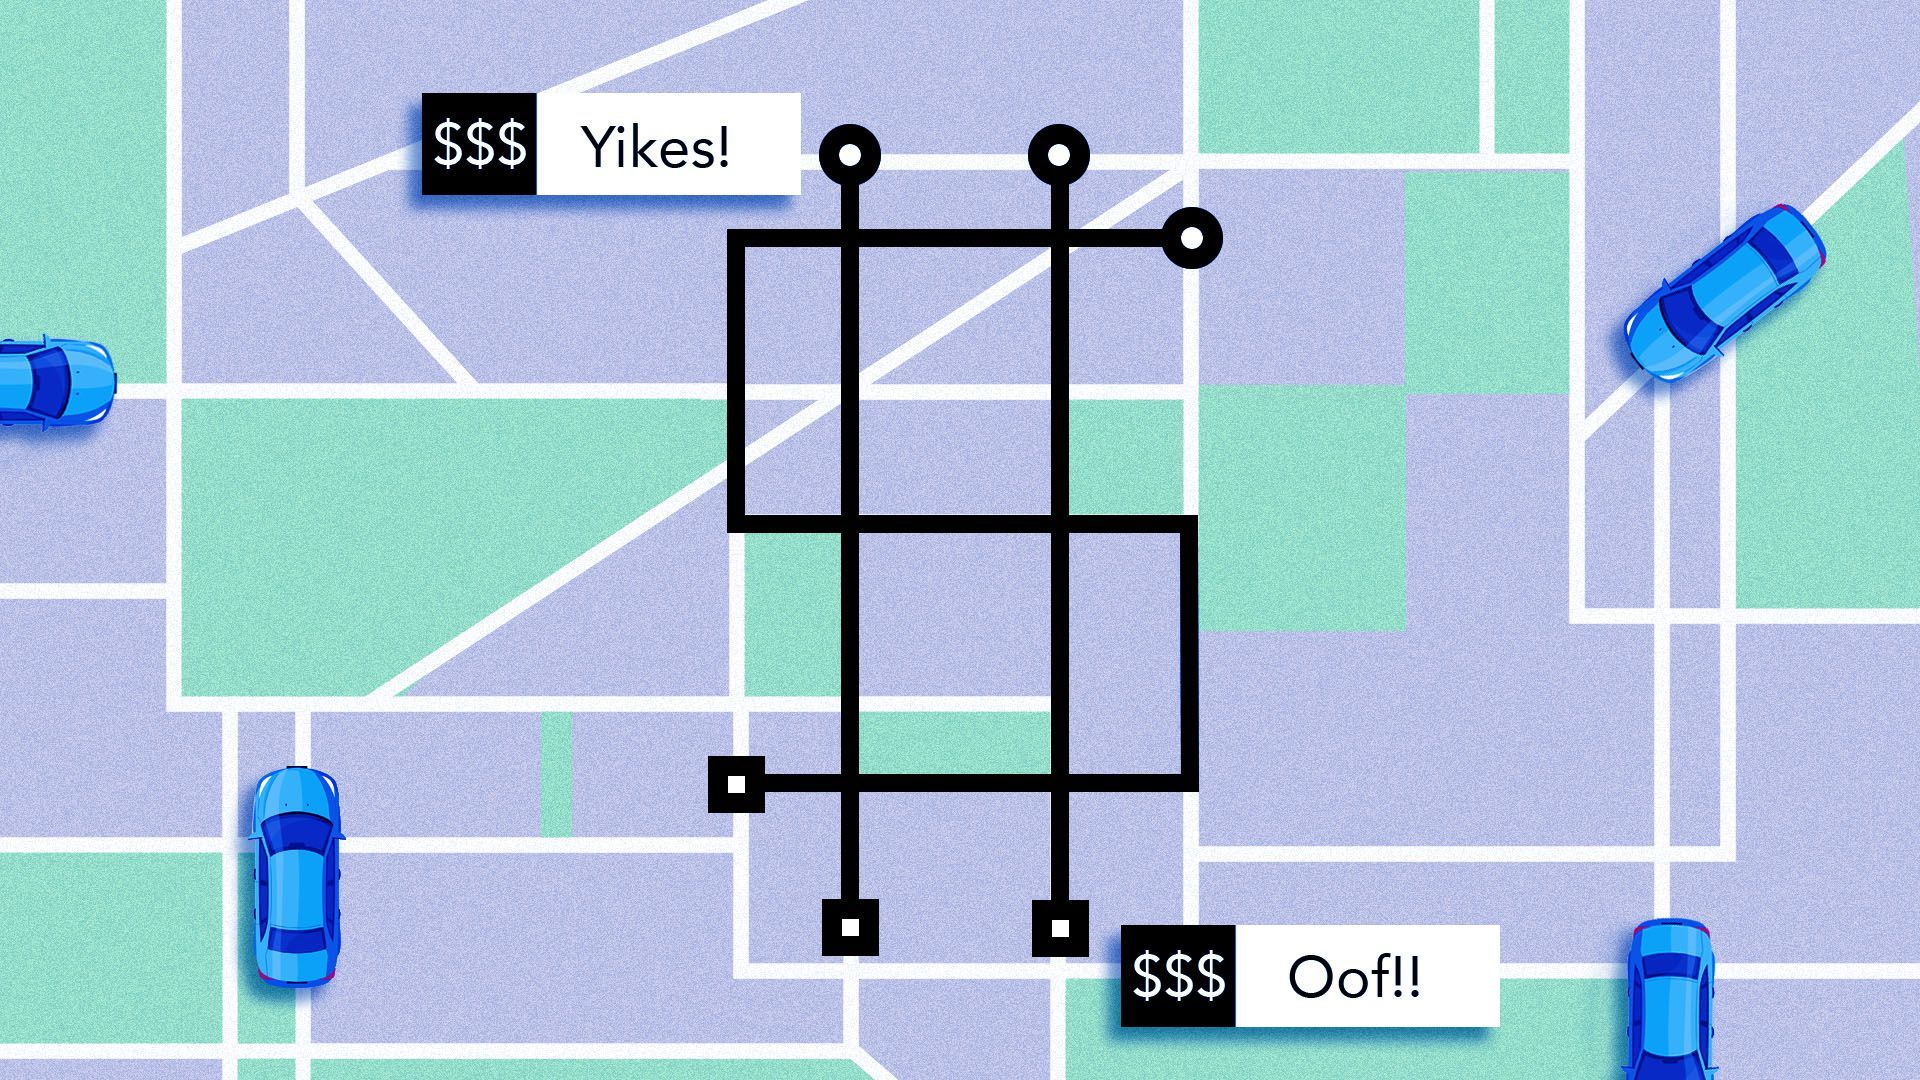 Illustration of a ride-sharing map interface making the shape of a dollar sign